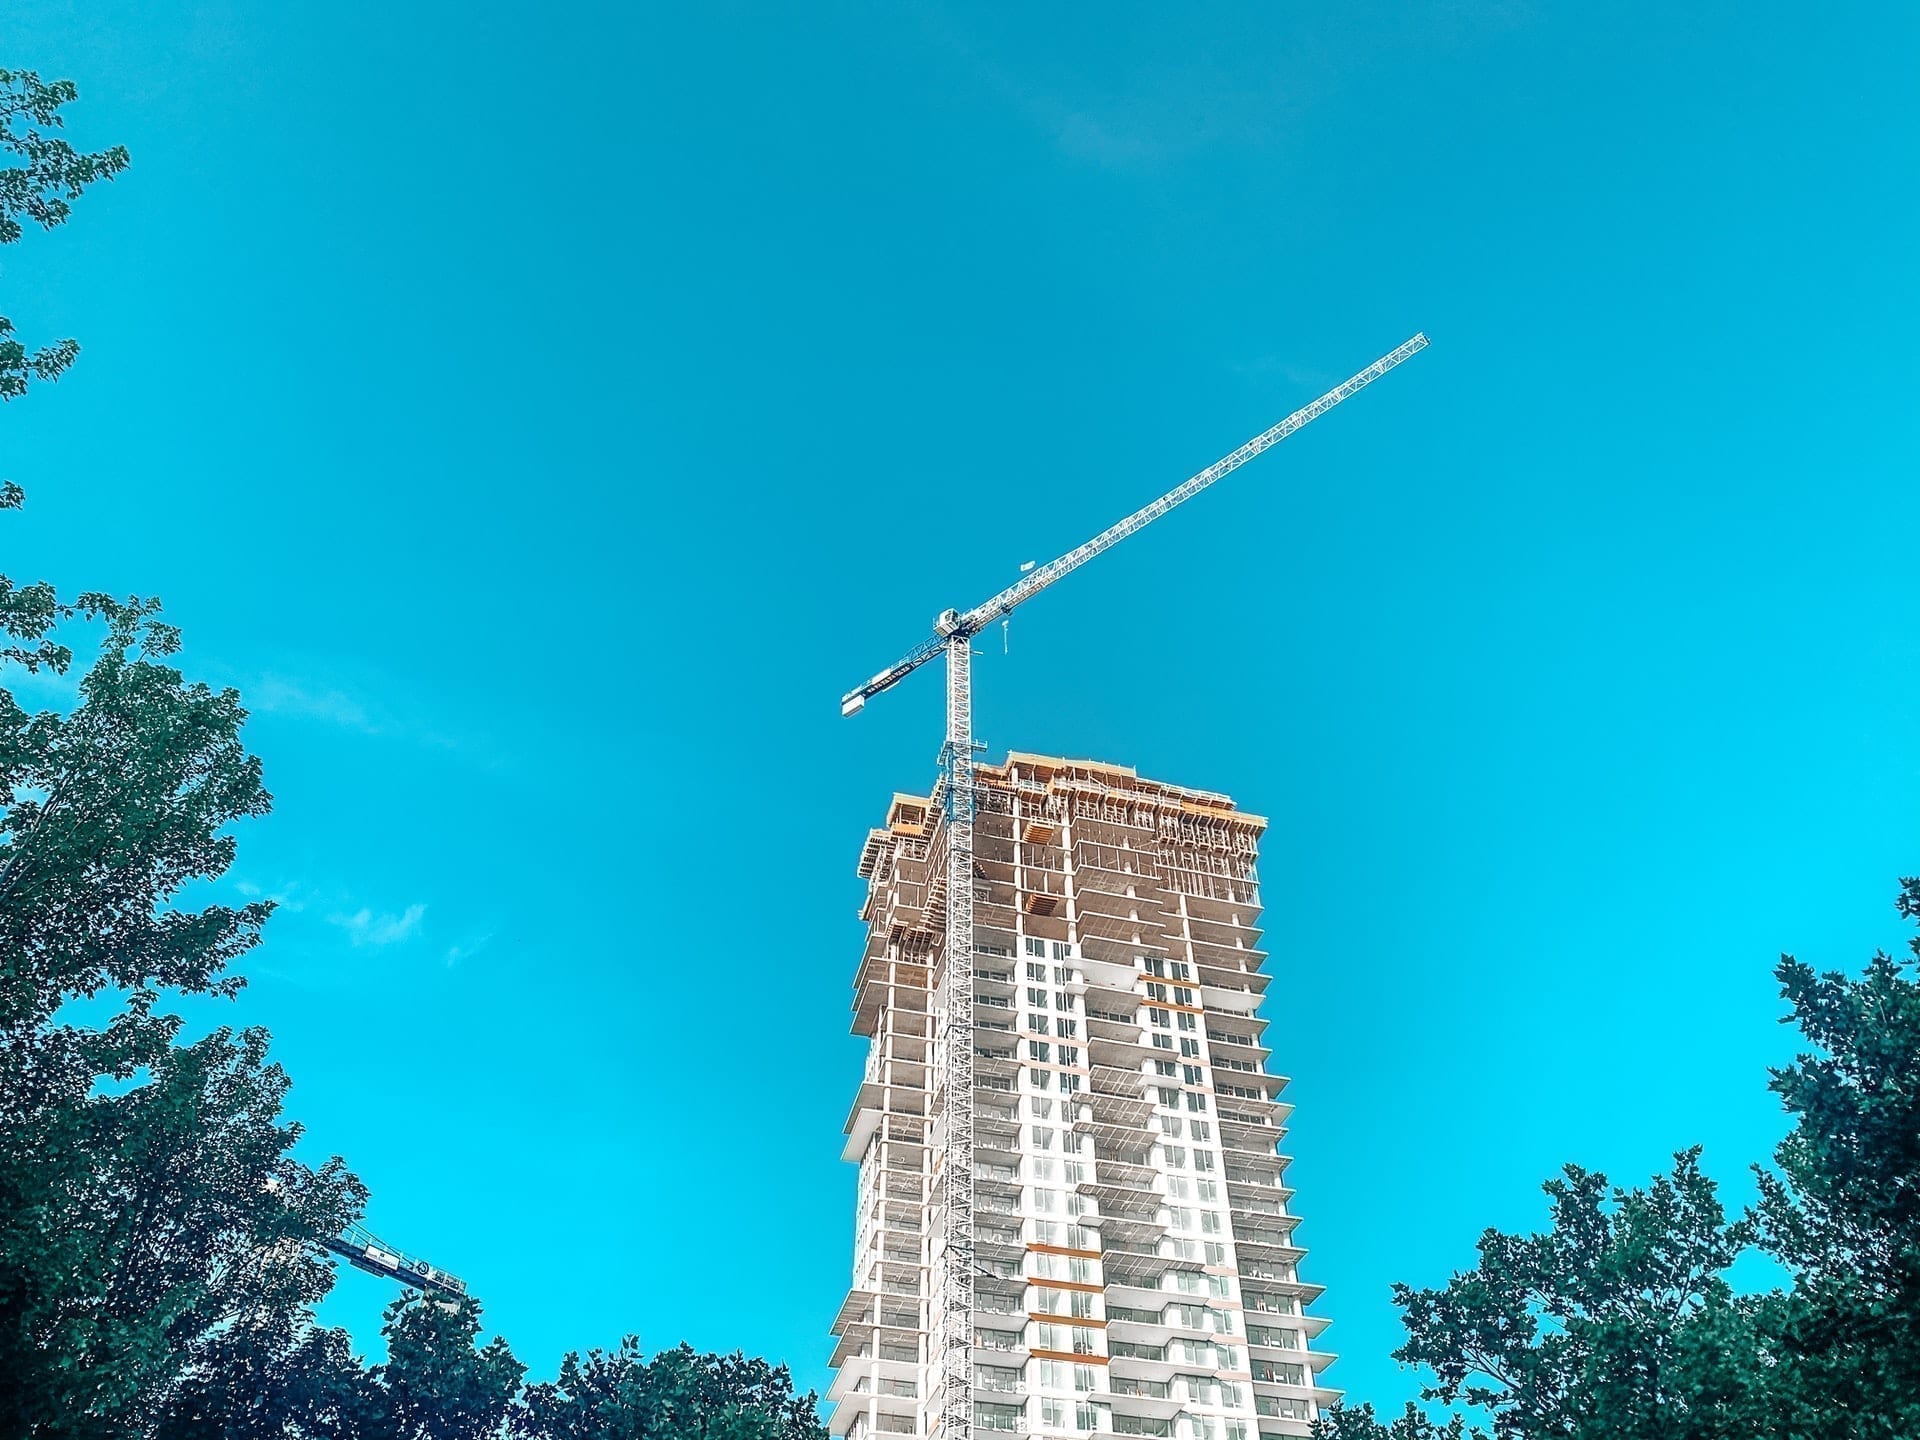 Condo in development with a crane in foreground; highlighting mortgage pre-approval before buying a property like a condo, house, or townhome